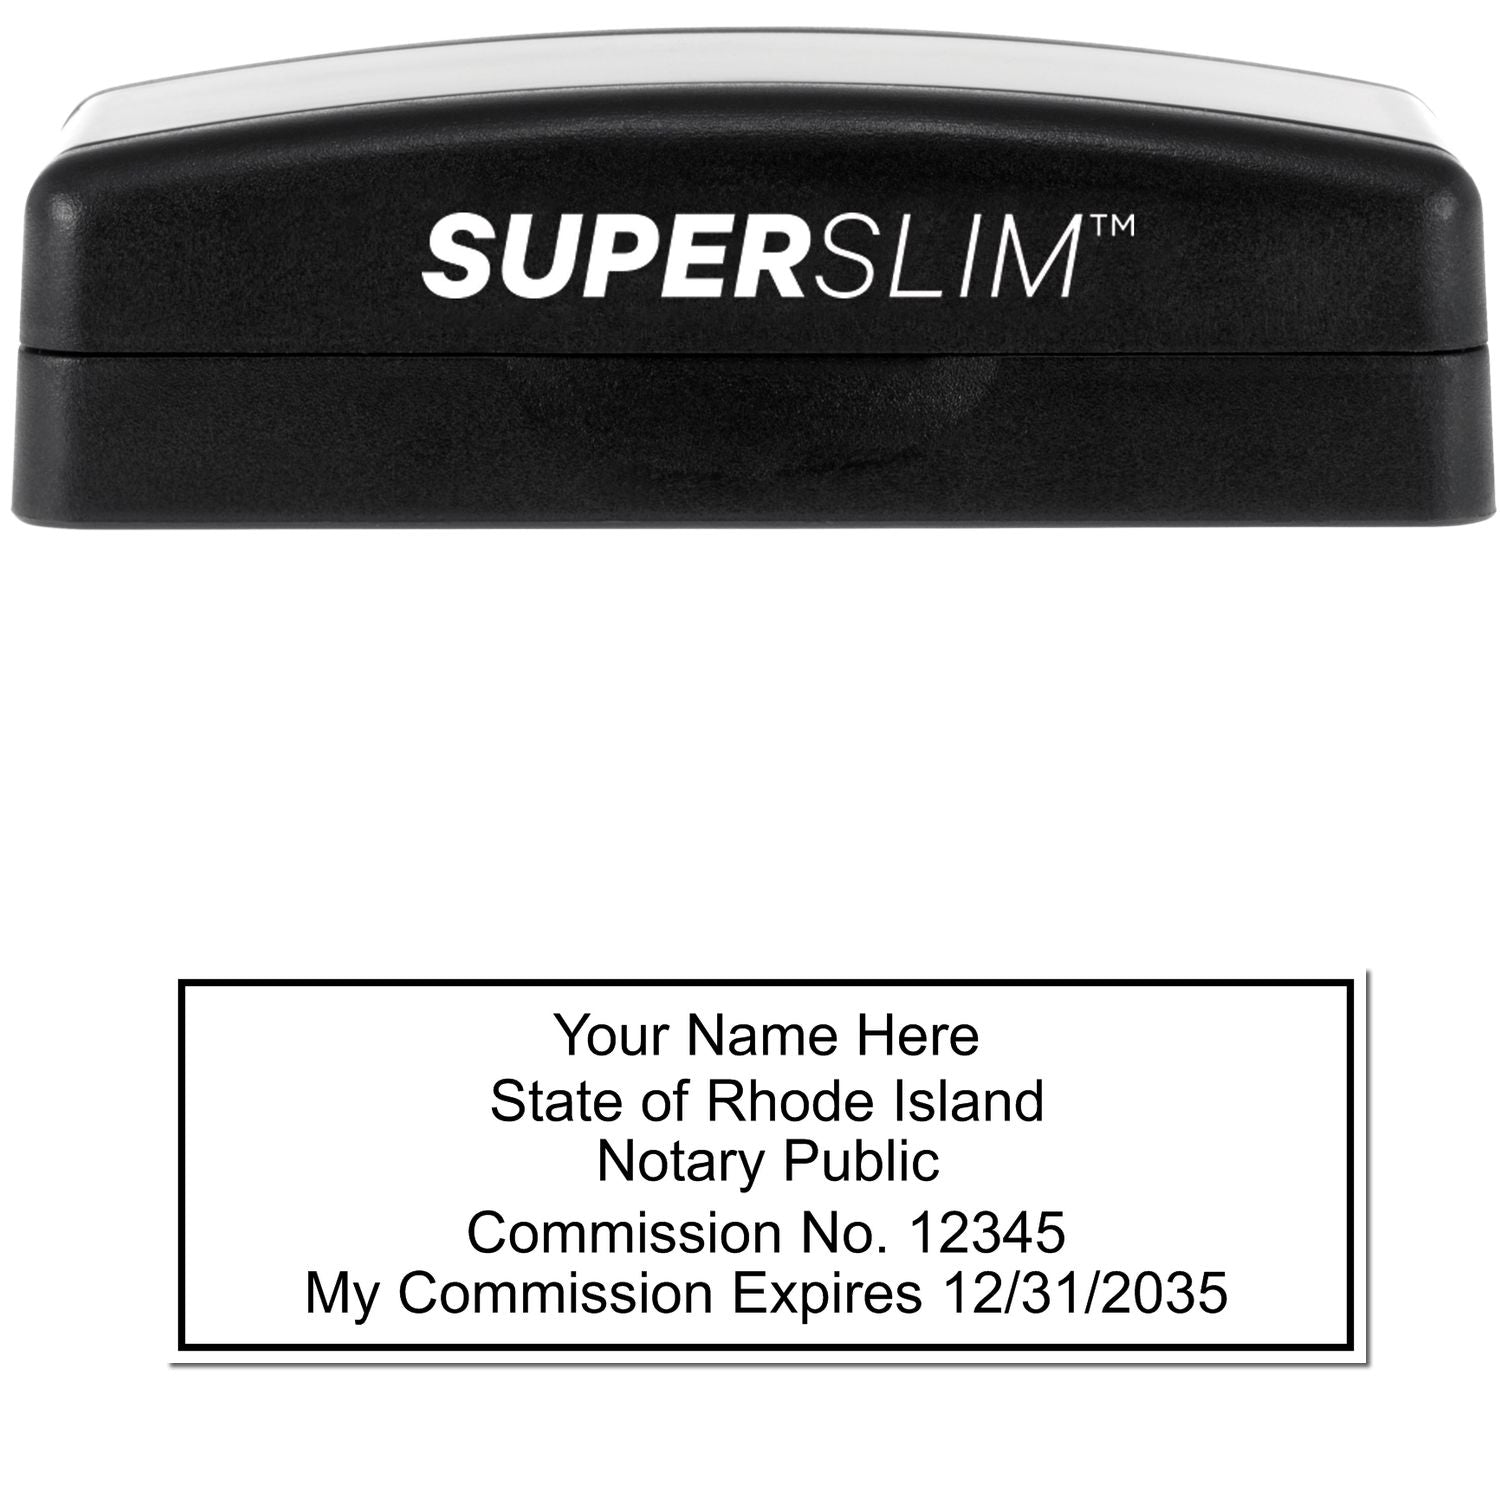 The main image for the Super Slim Rhode Island Notary Public Stamp depicting a sample of the imprint and electronic files